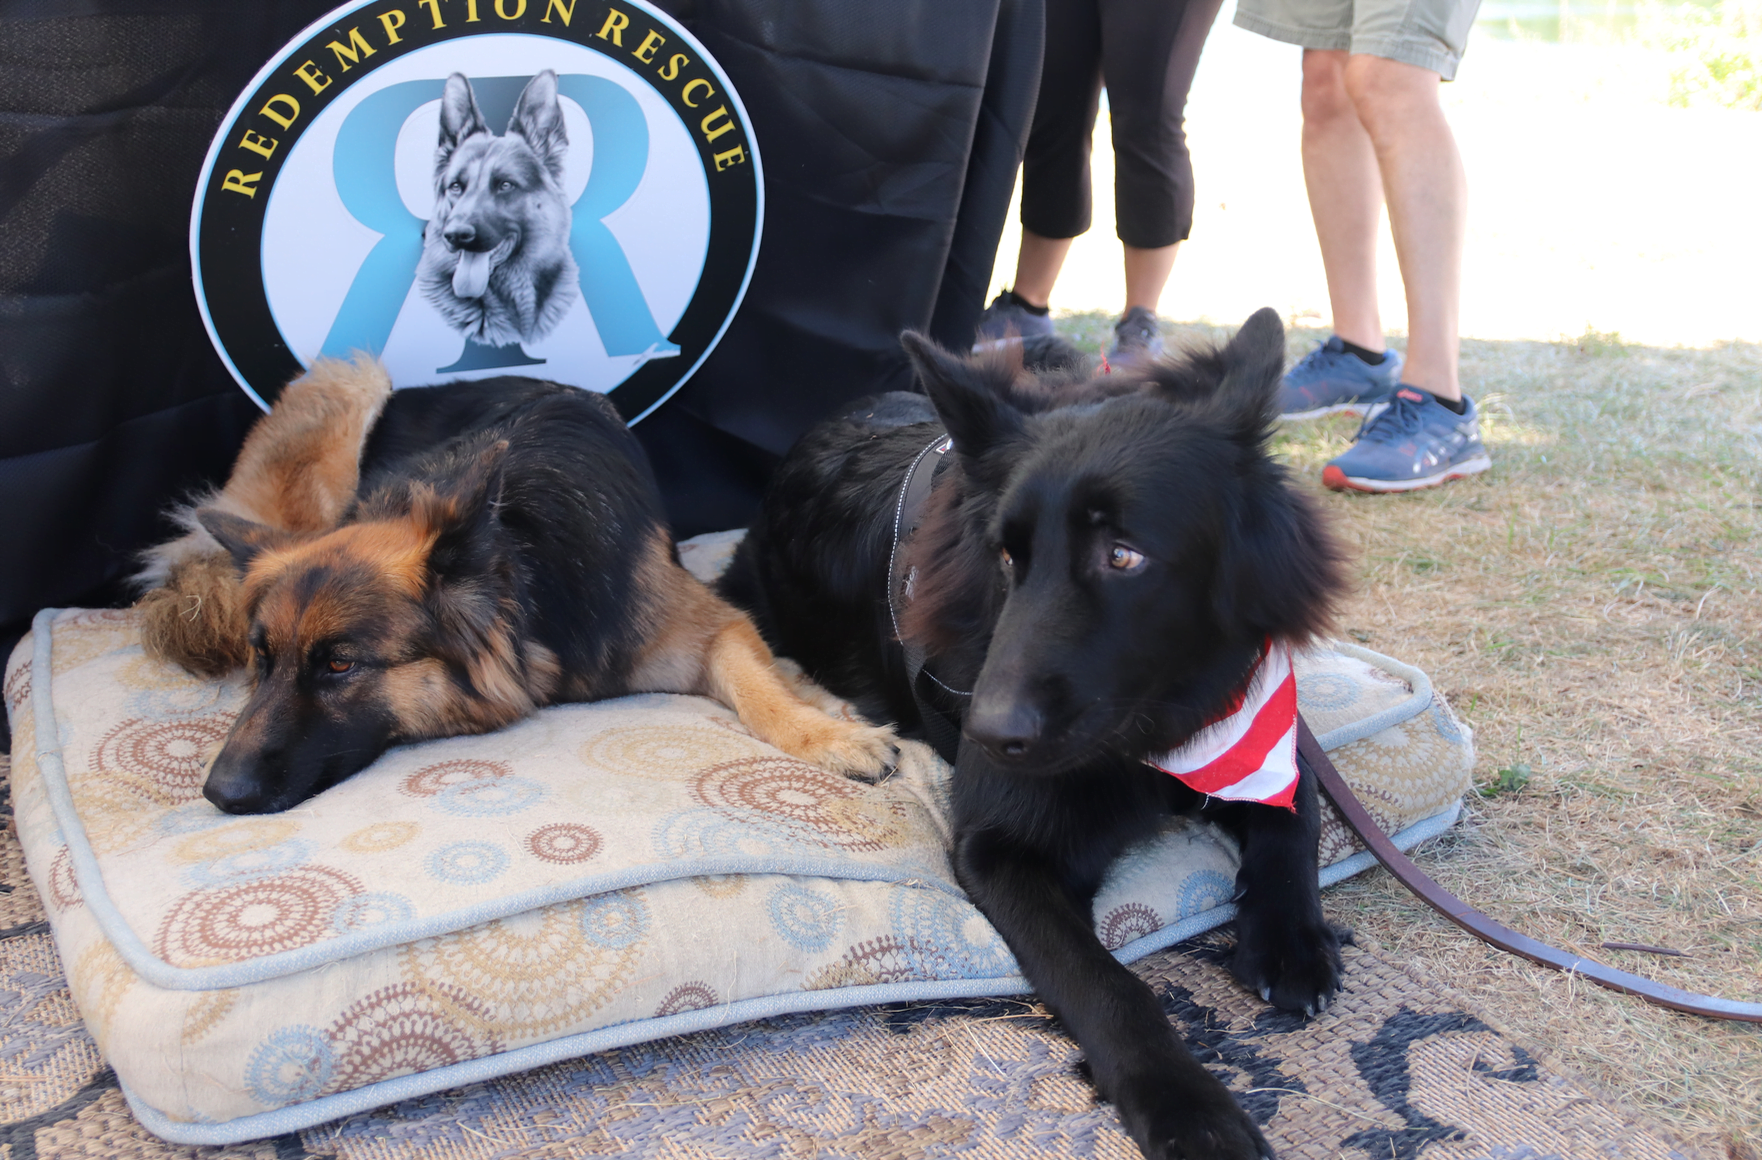 ARK Charities - Animal Rescue and Canine Charities were represented well by Gina and Kastiel. Sept 29, 2019 Photo: Leslie Yager